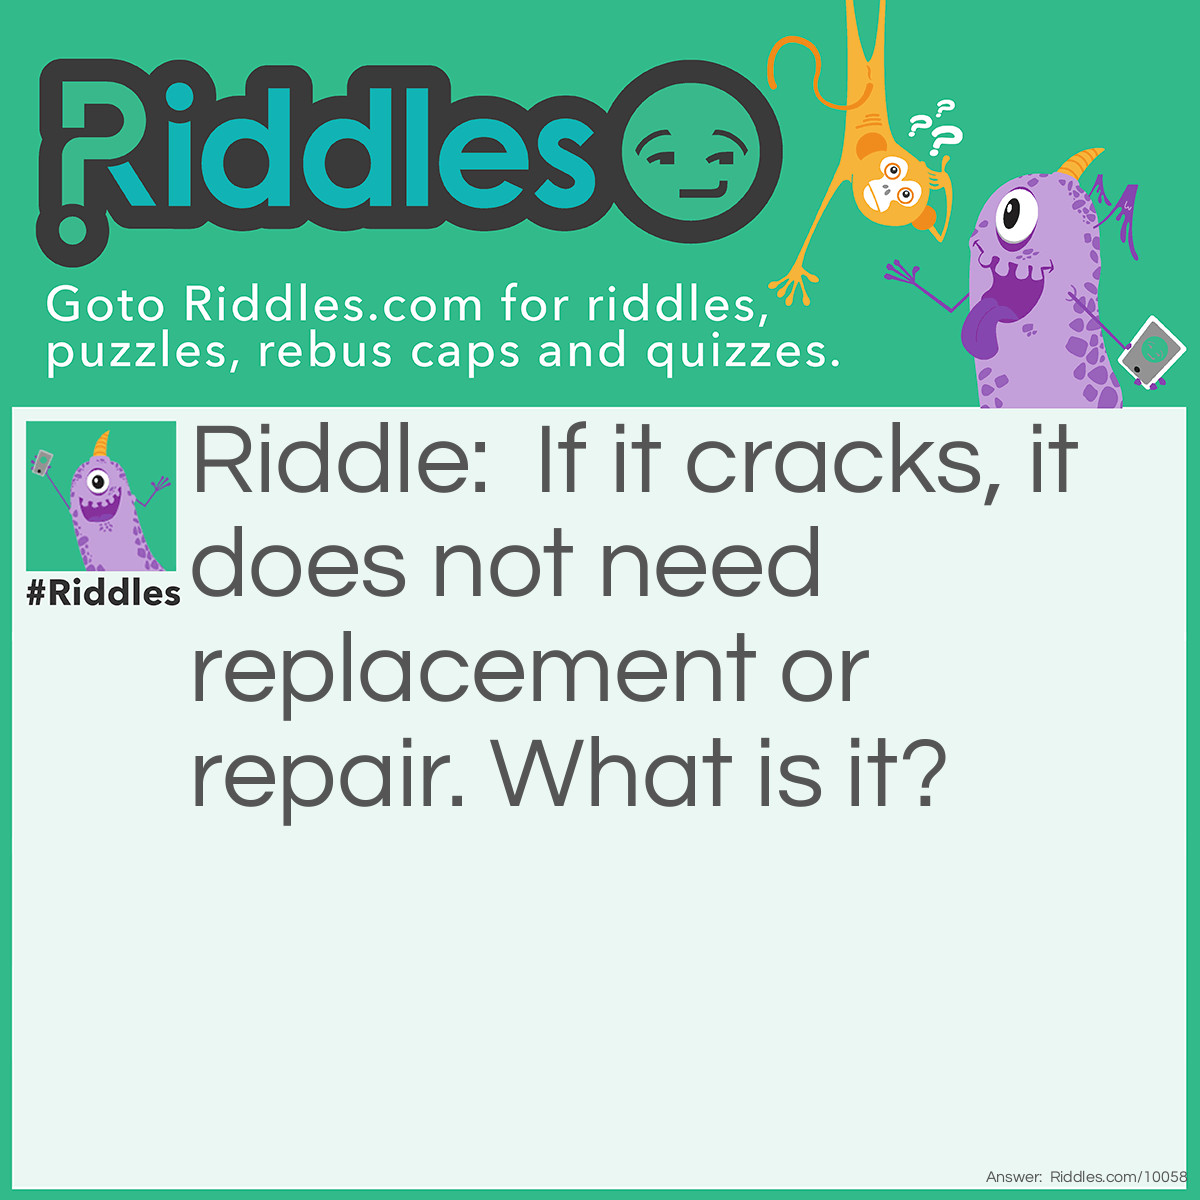 Riddle: If it cracks, it does not need replacement or repair. What is it? Answer: Ice.